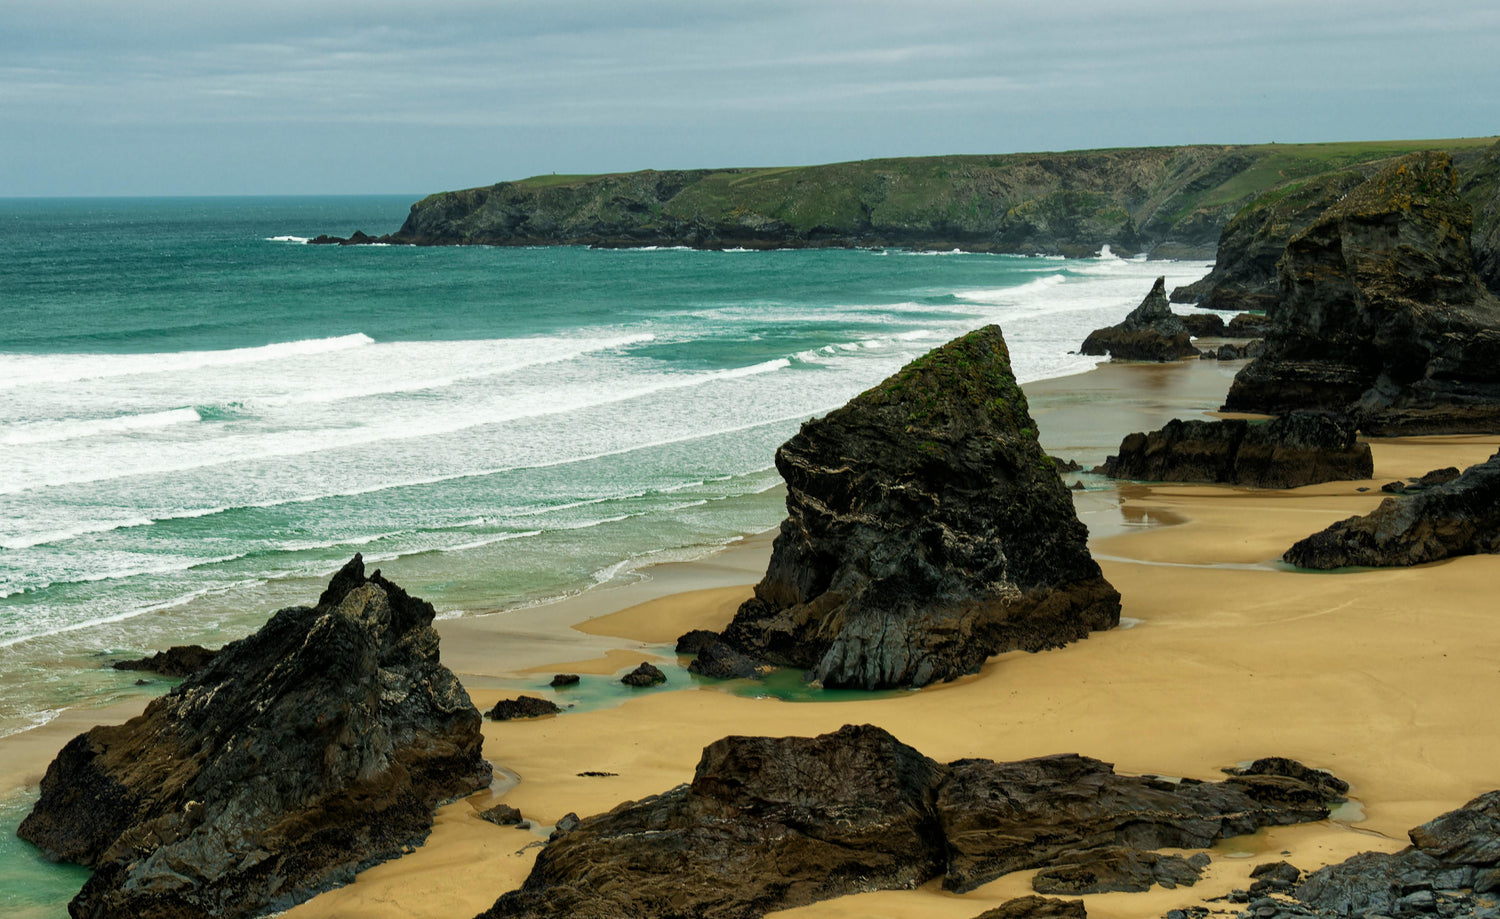 Rocks at Bedruthan Steps Beach, Cornwall, UK - Used with permission Photo by Carsten Ruthemann: https://www.pexels.com/photo/rocks-at-bedruthan-steps-beach-cornwall-uk-18810826/